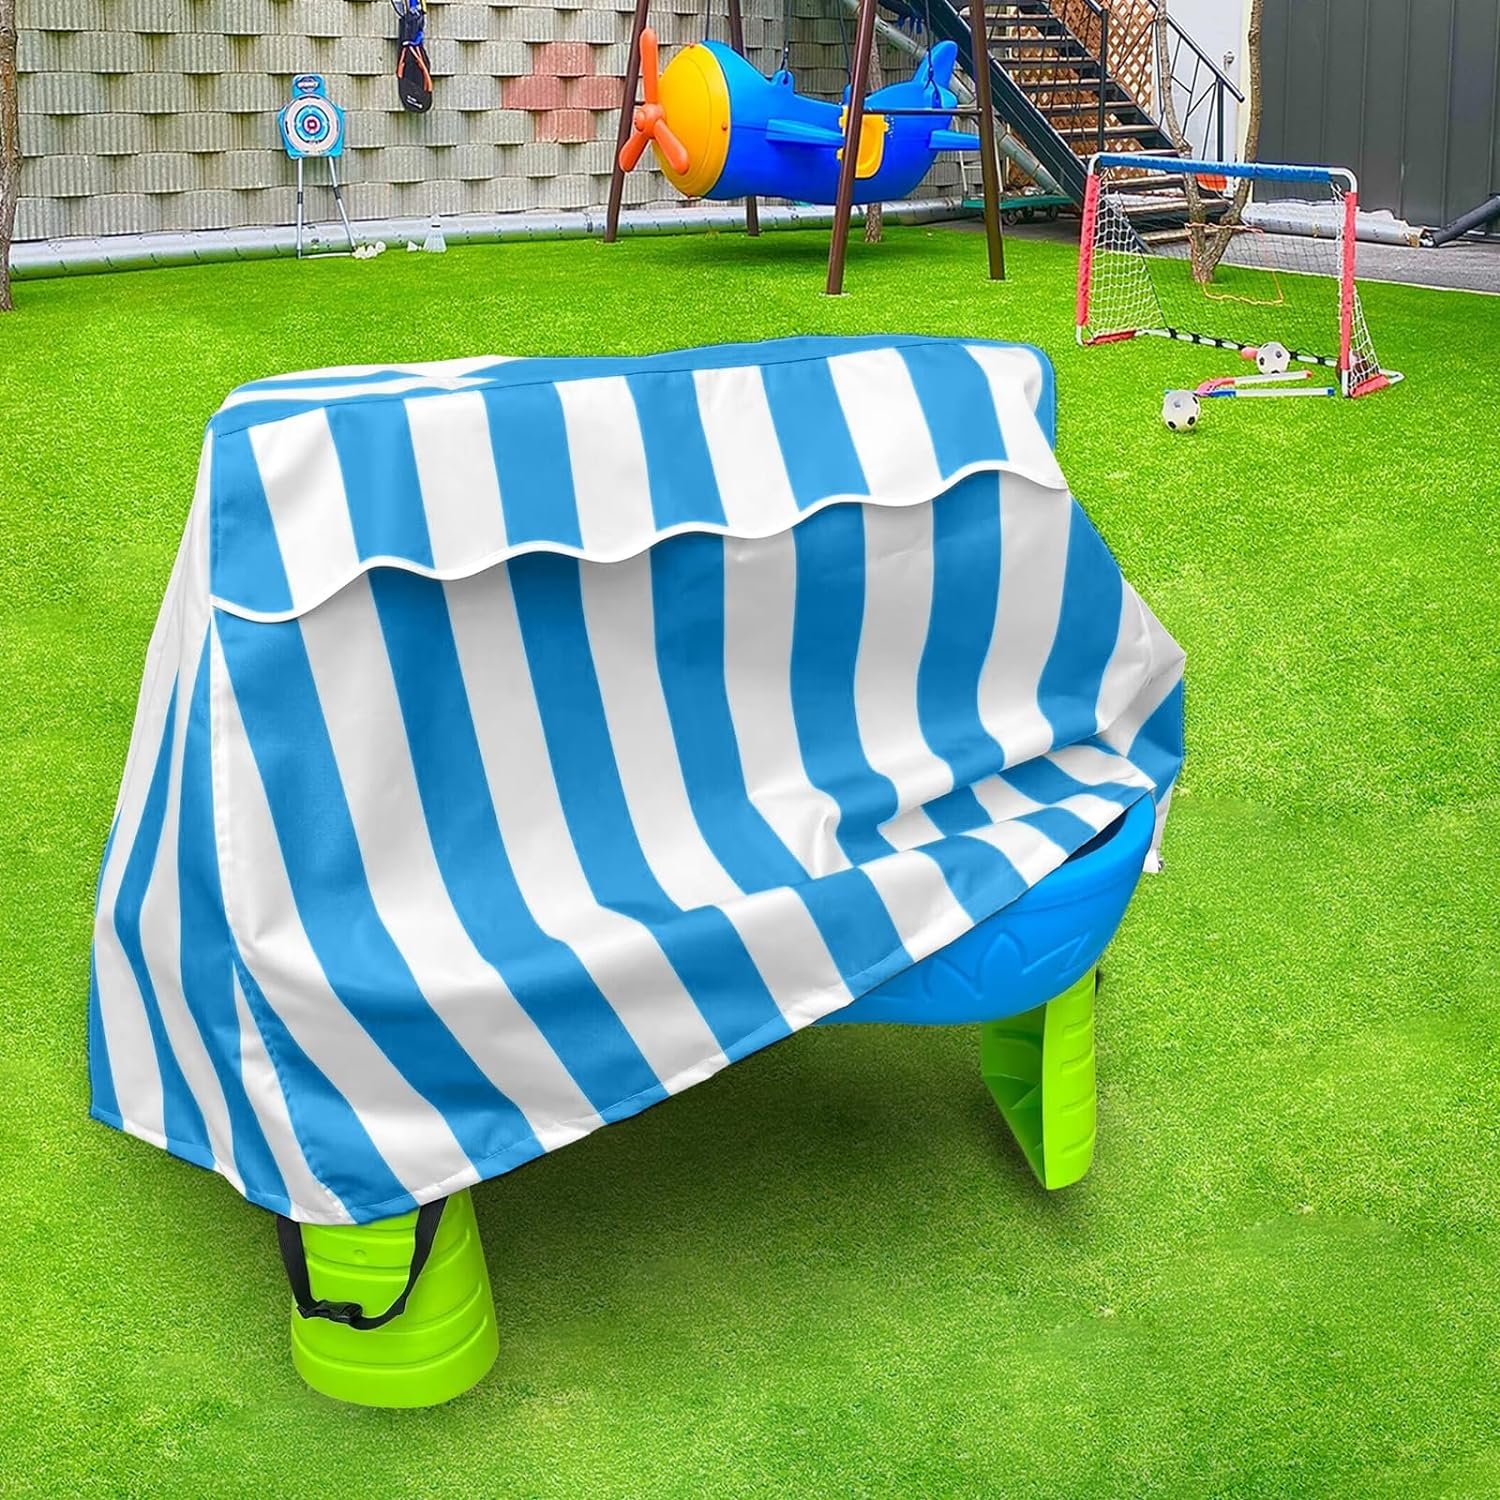 Kids Water Table Cover Fit Step 2 Water Table, Outdoor Table Cover For Step 2 Rain Showers Splash Pond Water Table,Outdoor Water Table Toys Cover for Water Table for Toddlers 1-3 -Cover Only